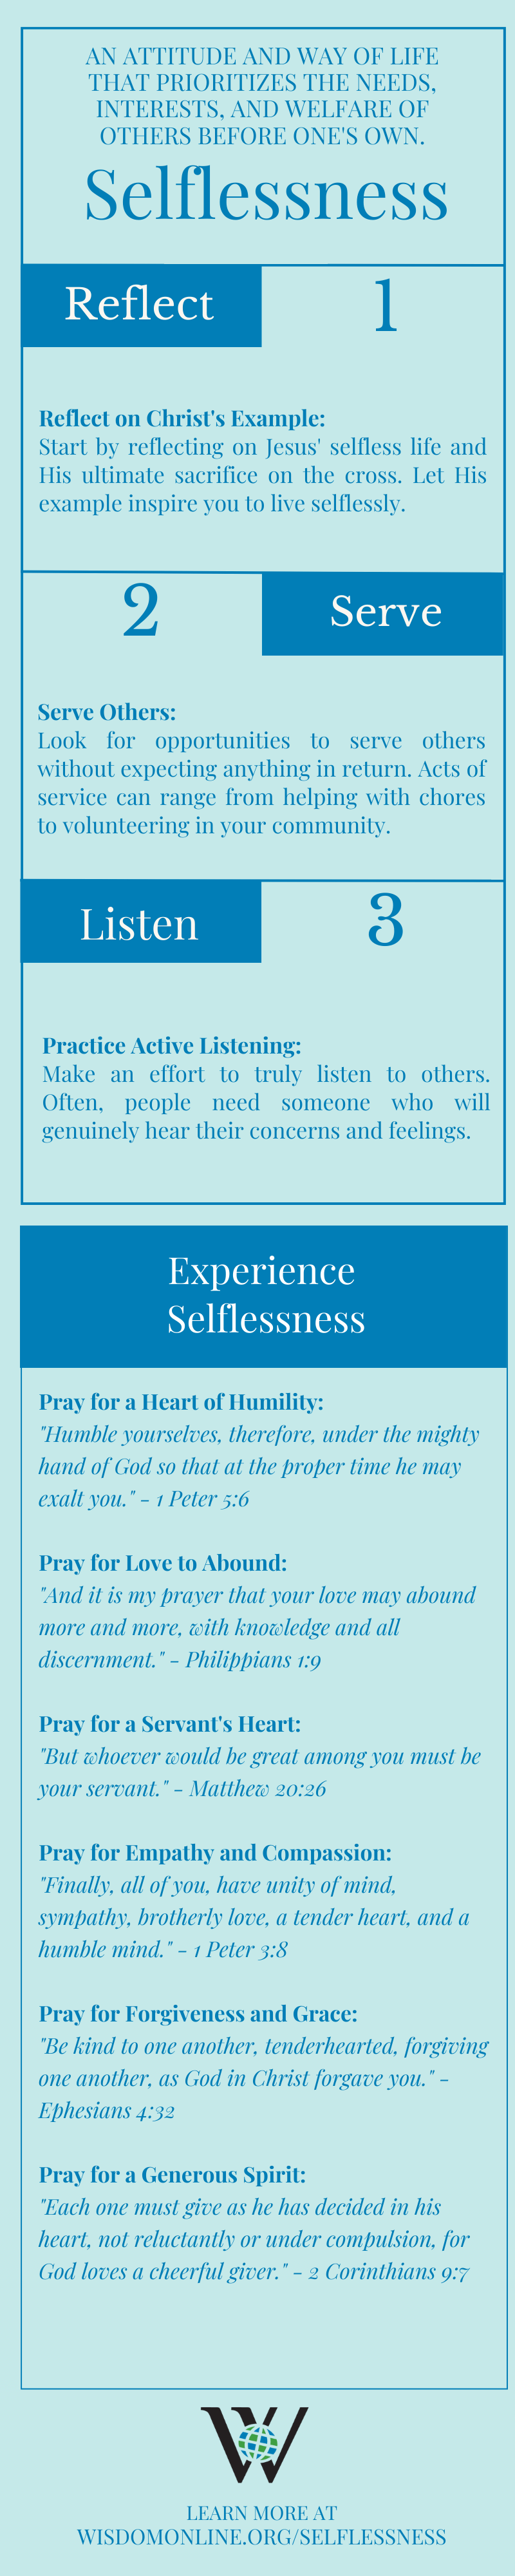 Infographic on the biblical quality of selflessness.